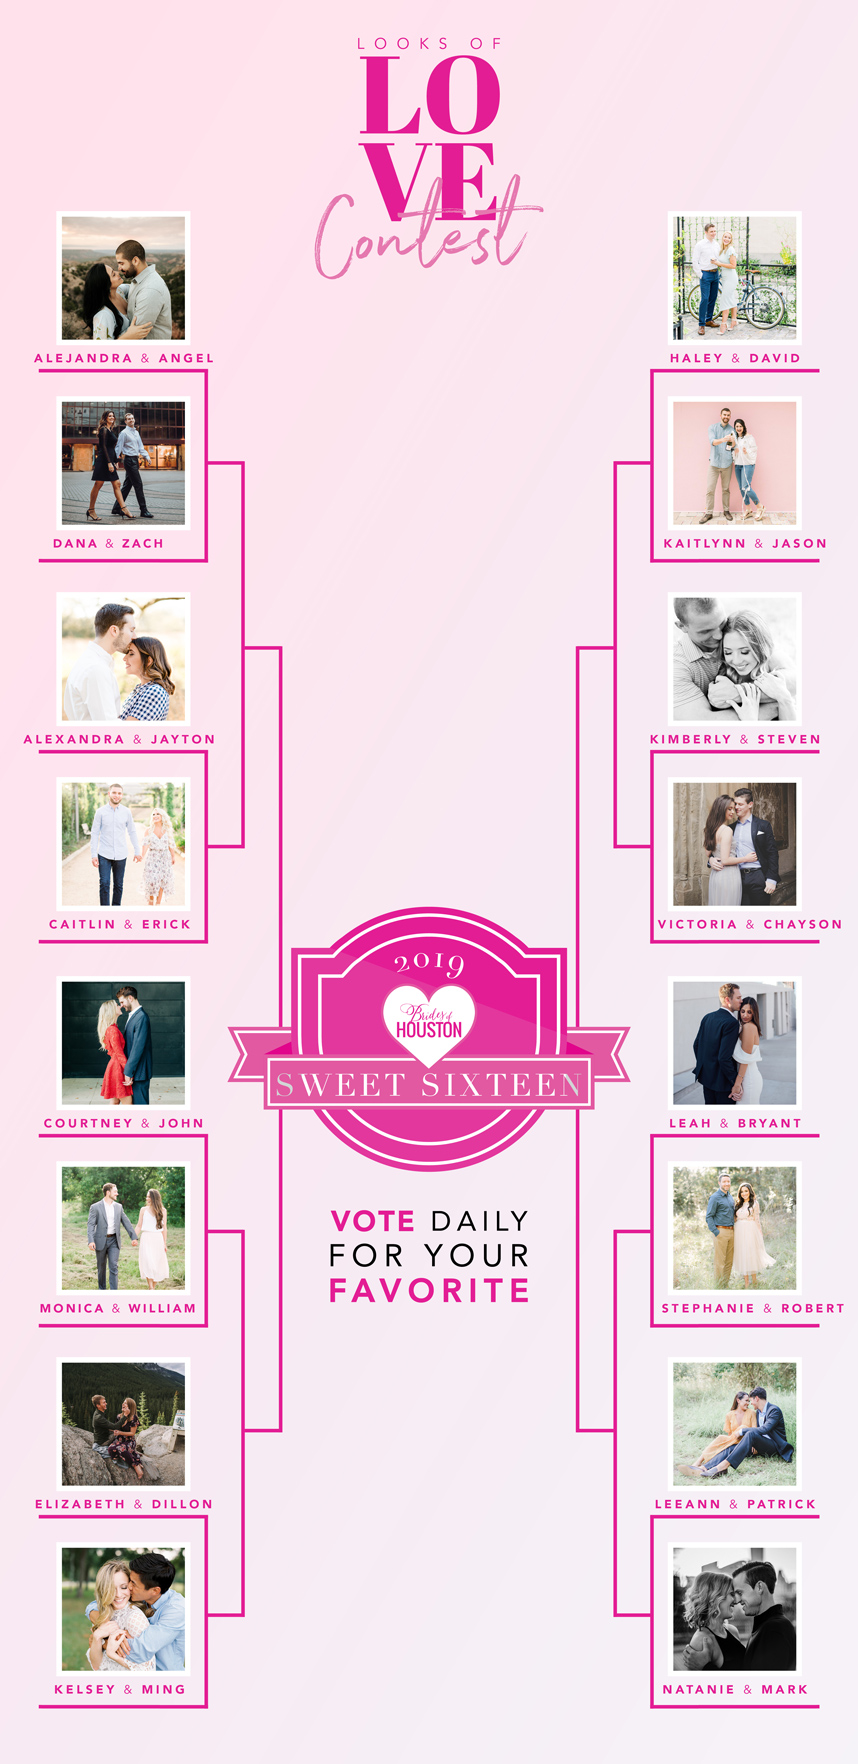 Looks of Love Contest 2019 – Cast your vote for our Sweet 16 Finalists!